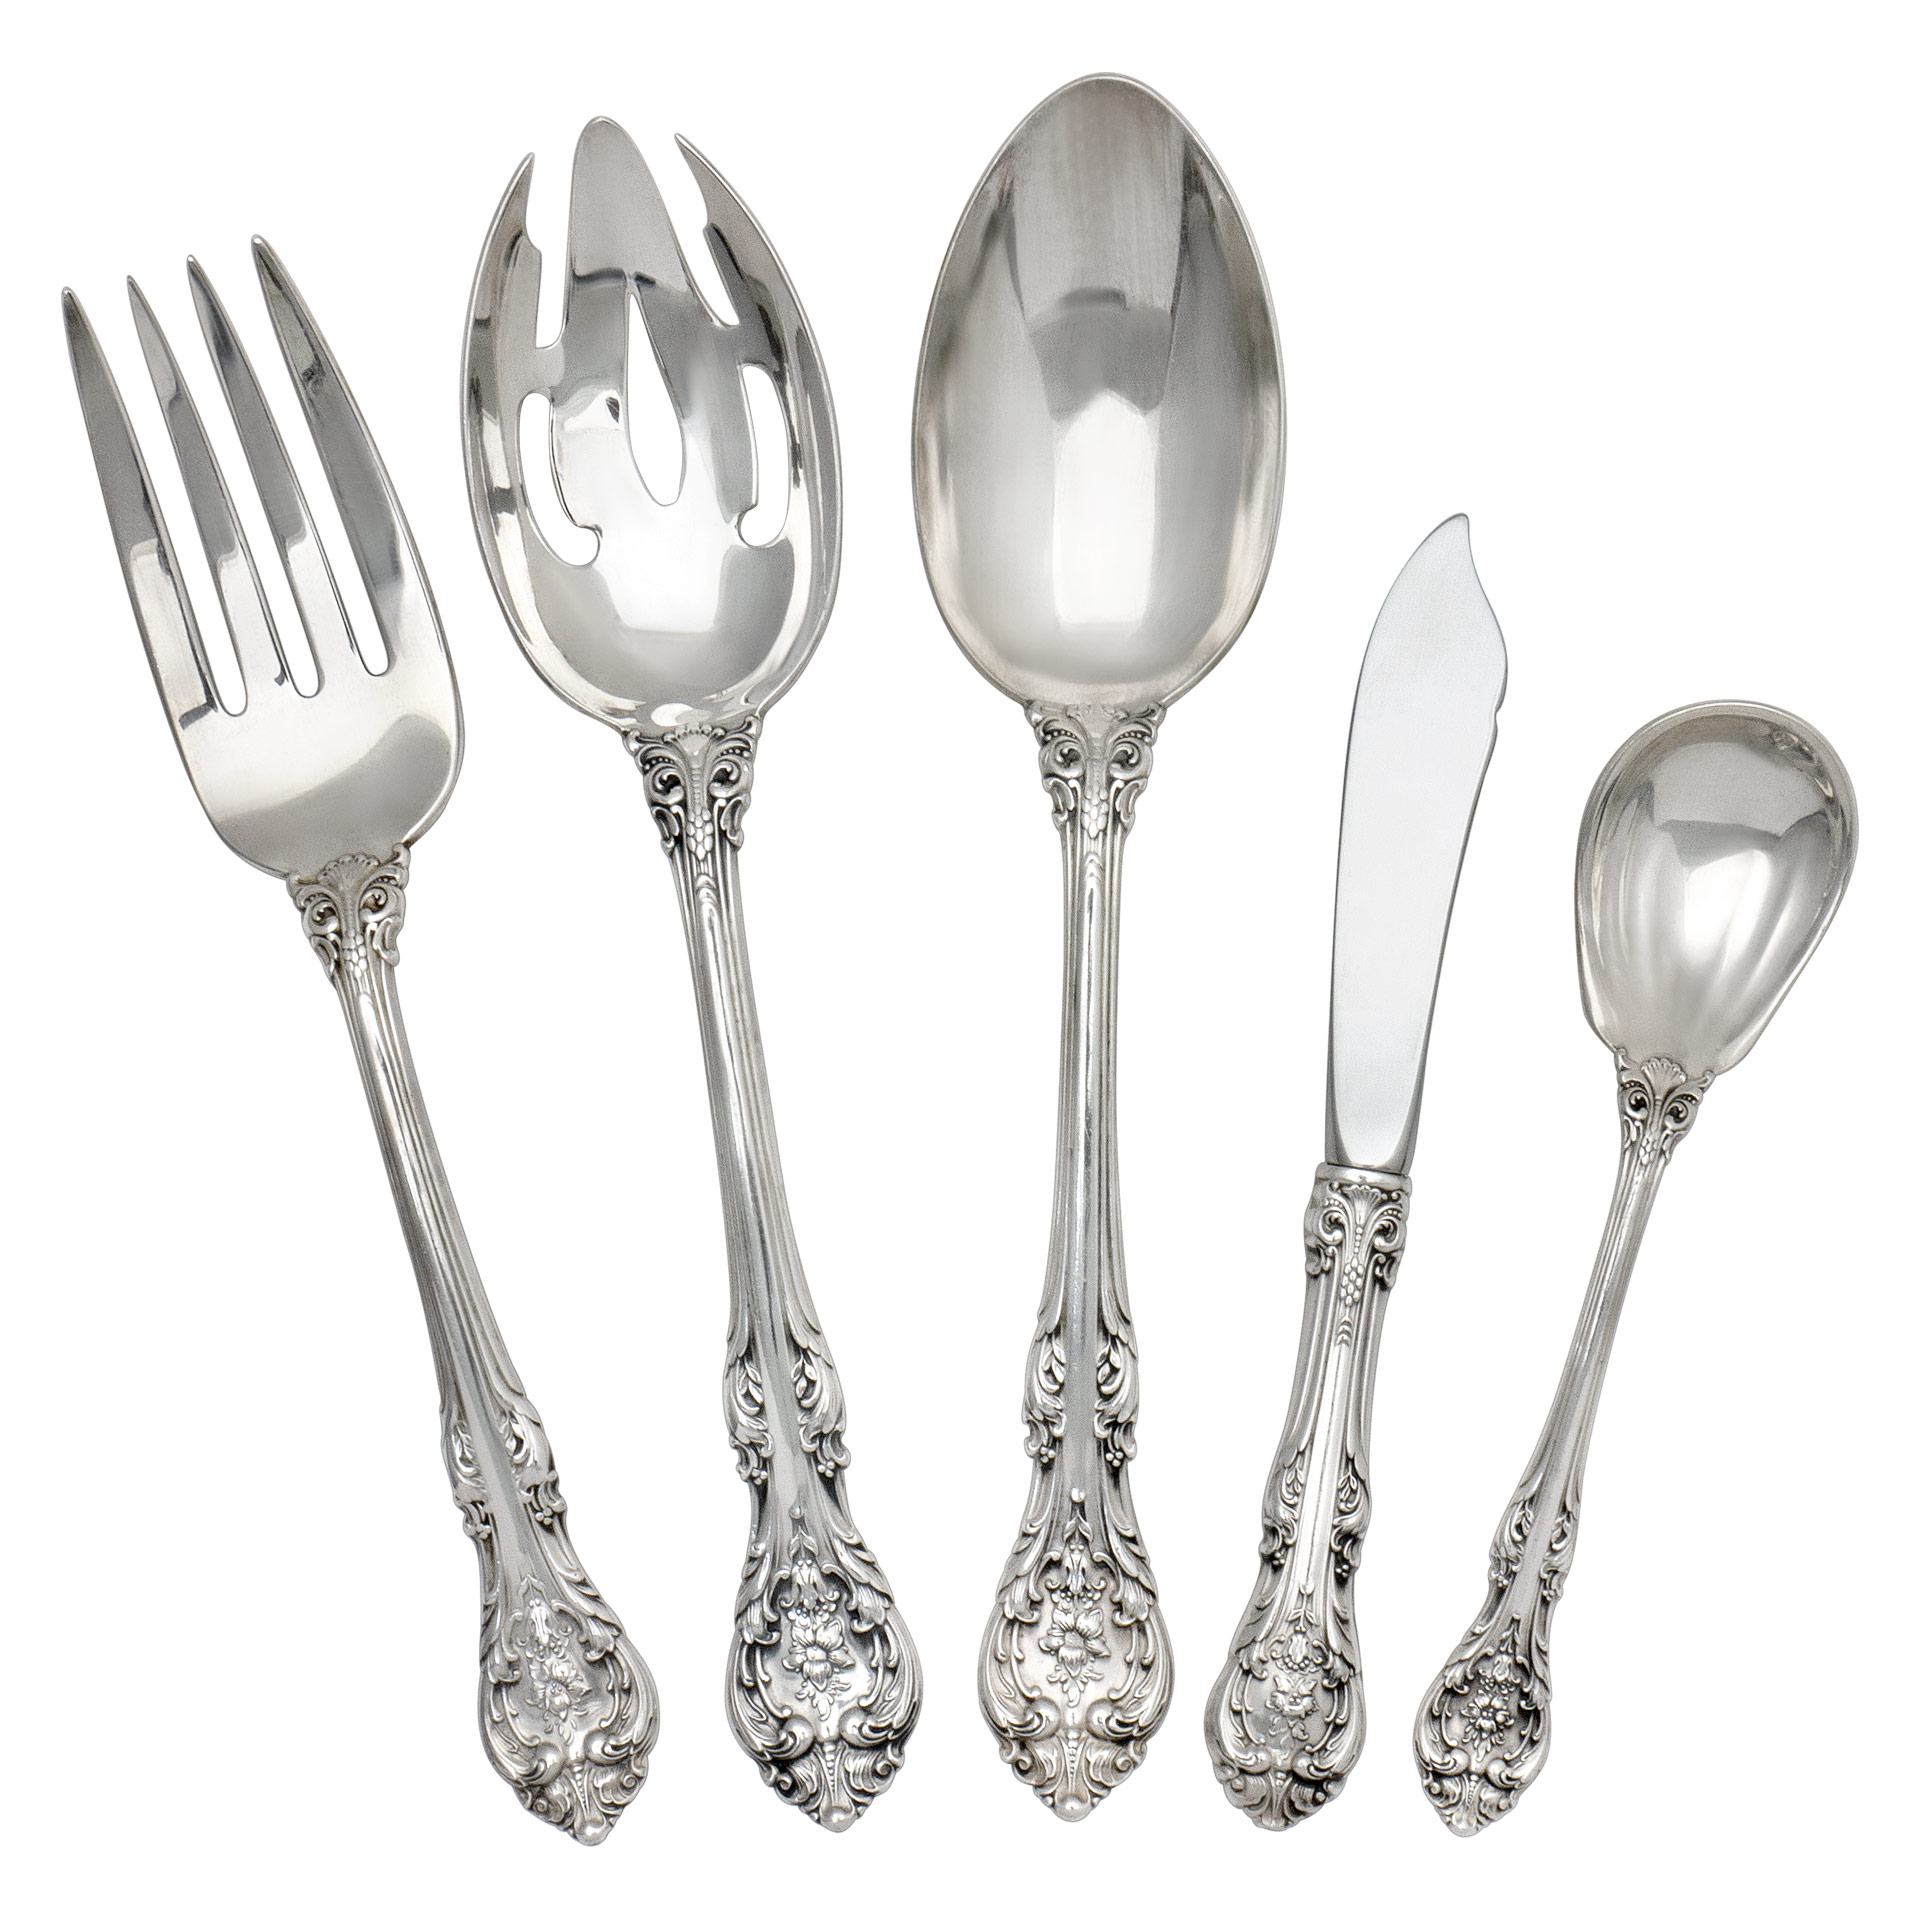 KING EDWARD Sterling Silver Flatware set patented in 1936 by Gorham- 121 pieces total. 8 Place setting for 10 + 5 Serving Pieces image 3